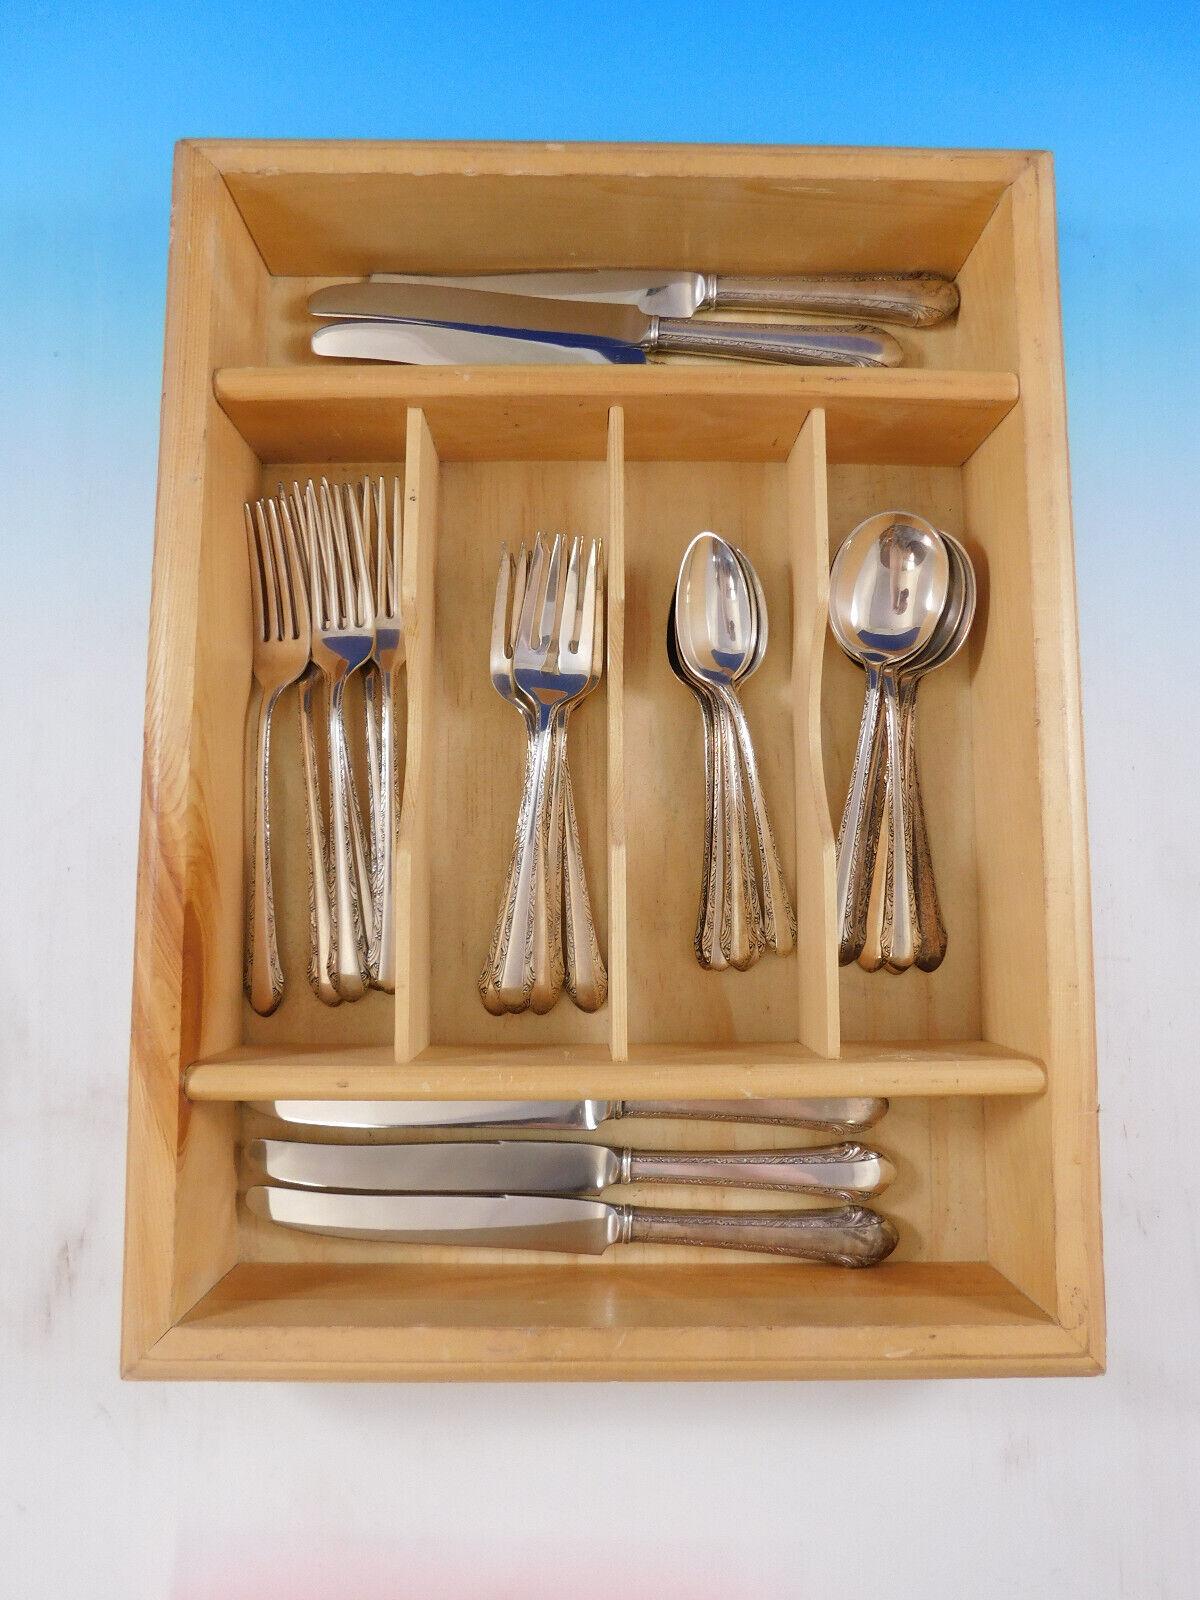 Chased Romantique by Alvin sterling silver Flatware set, 30 pieces. This set includes:

6 Knives, 9